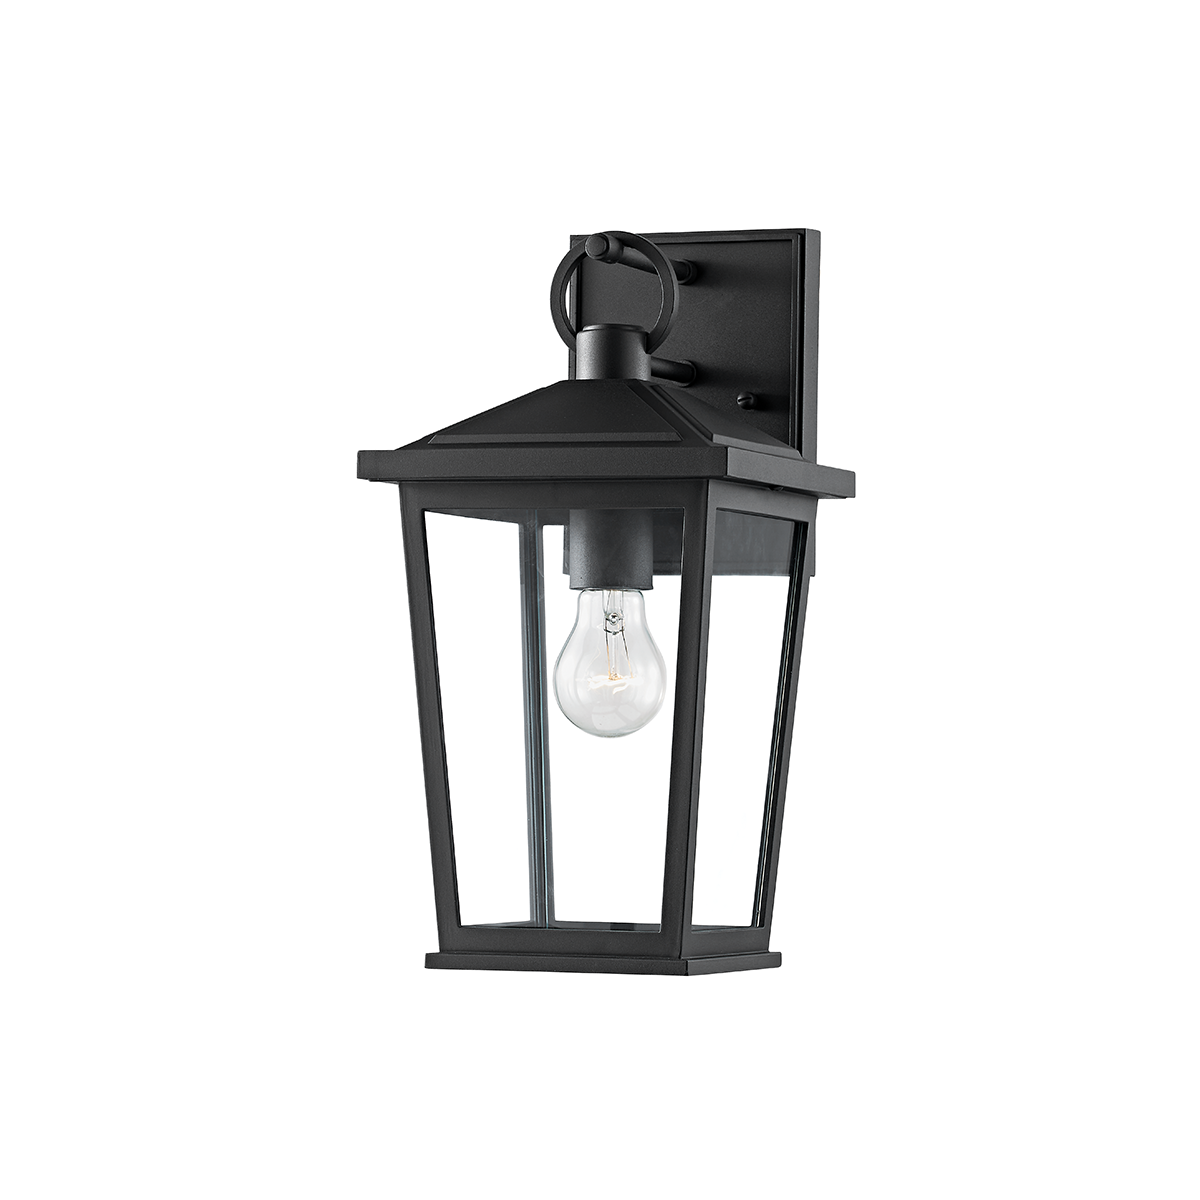 Troy Lighting 1 LIGHT SMALL EXTERIOR WALL SCONCE B8901 Outdoor l Wall Troy Lighting TEXTURE BLACK  